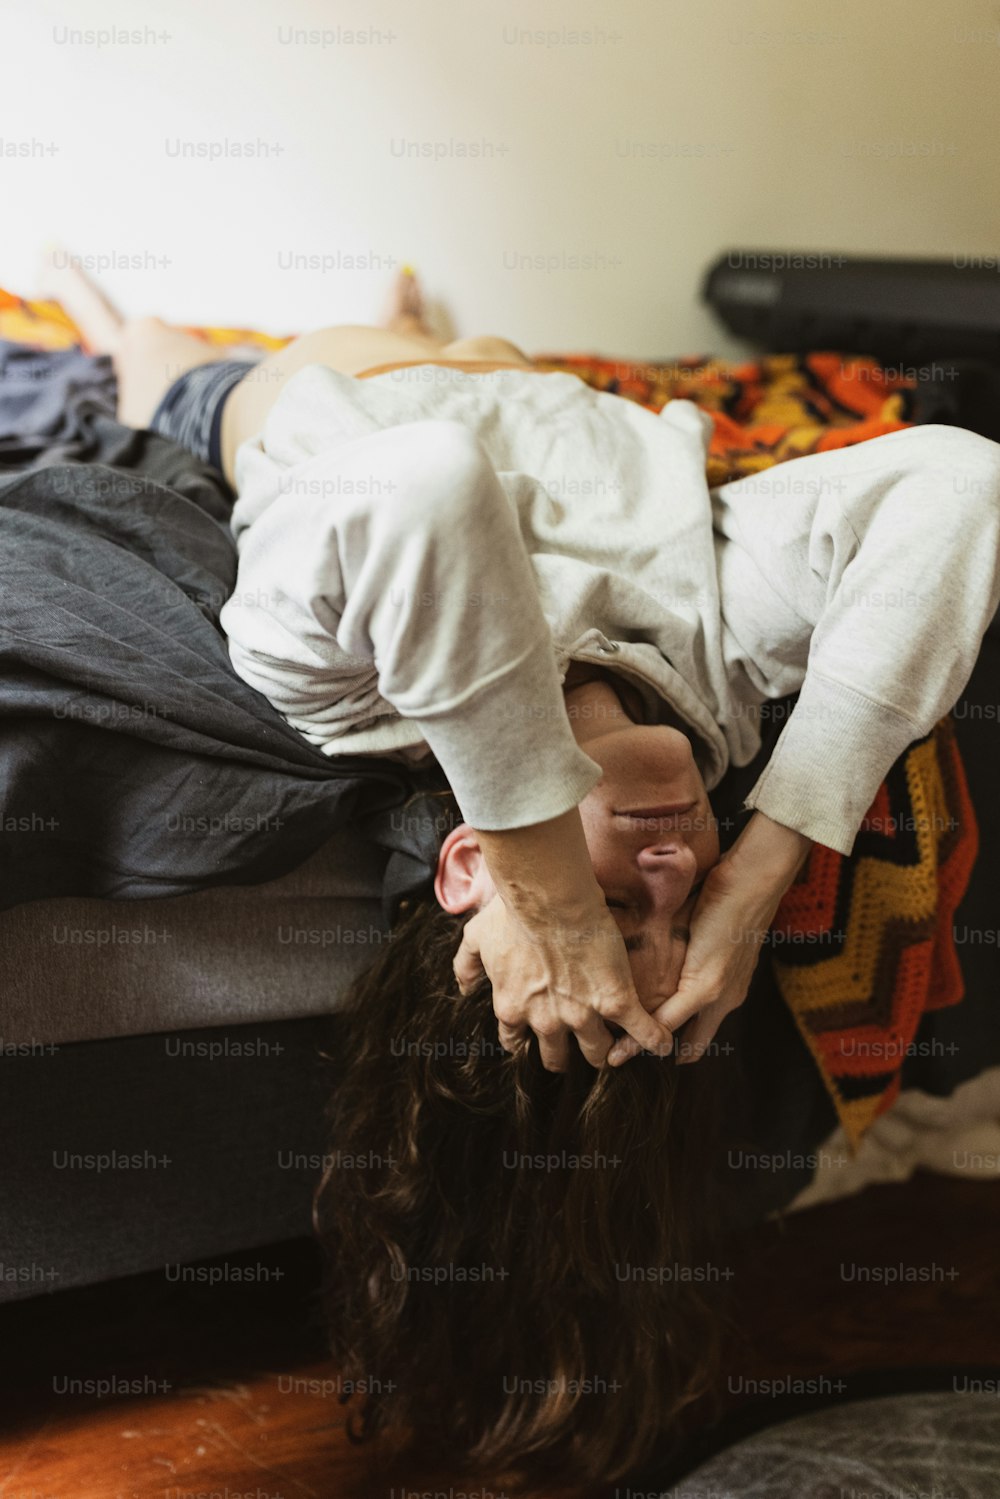 a person is upside down on a bed